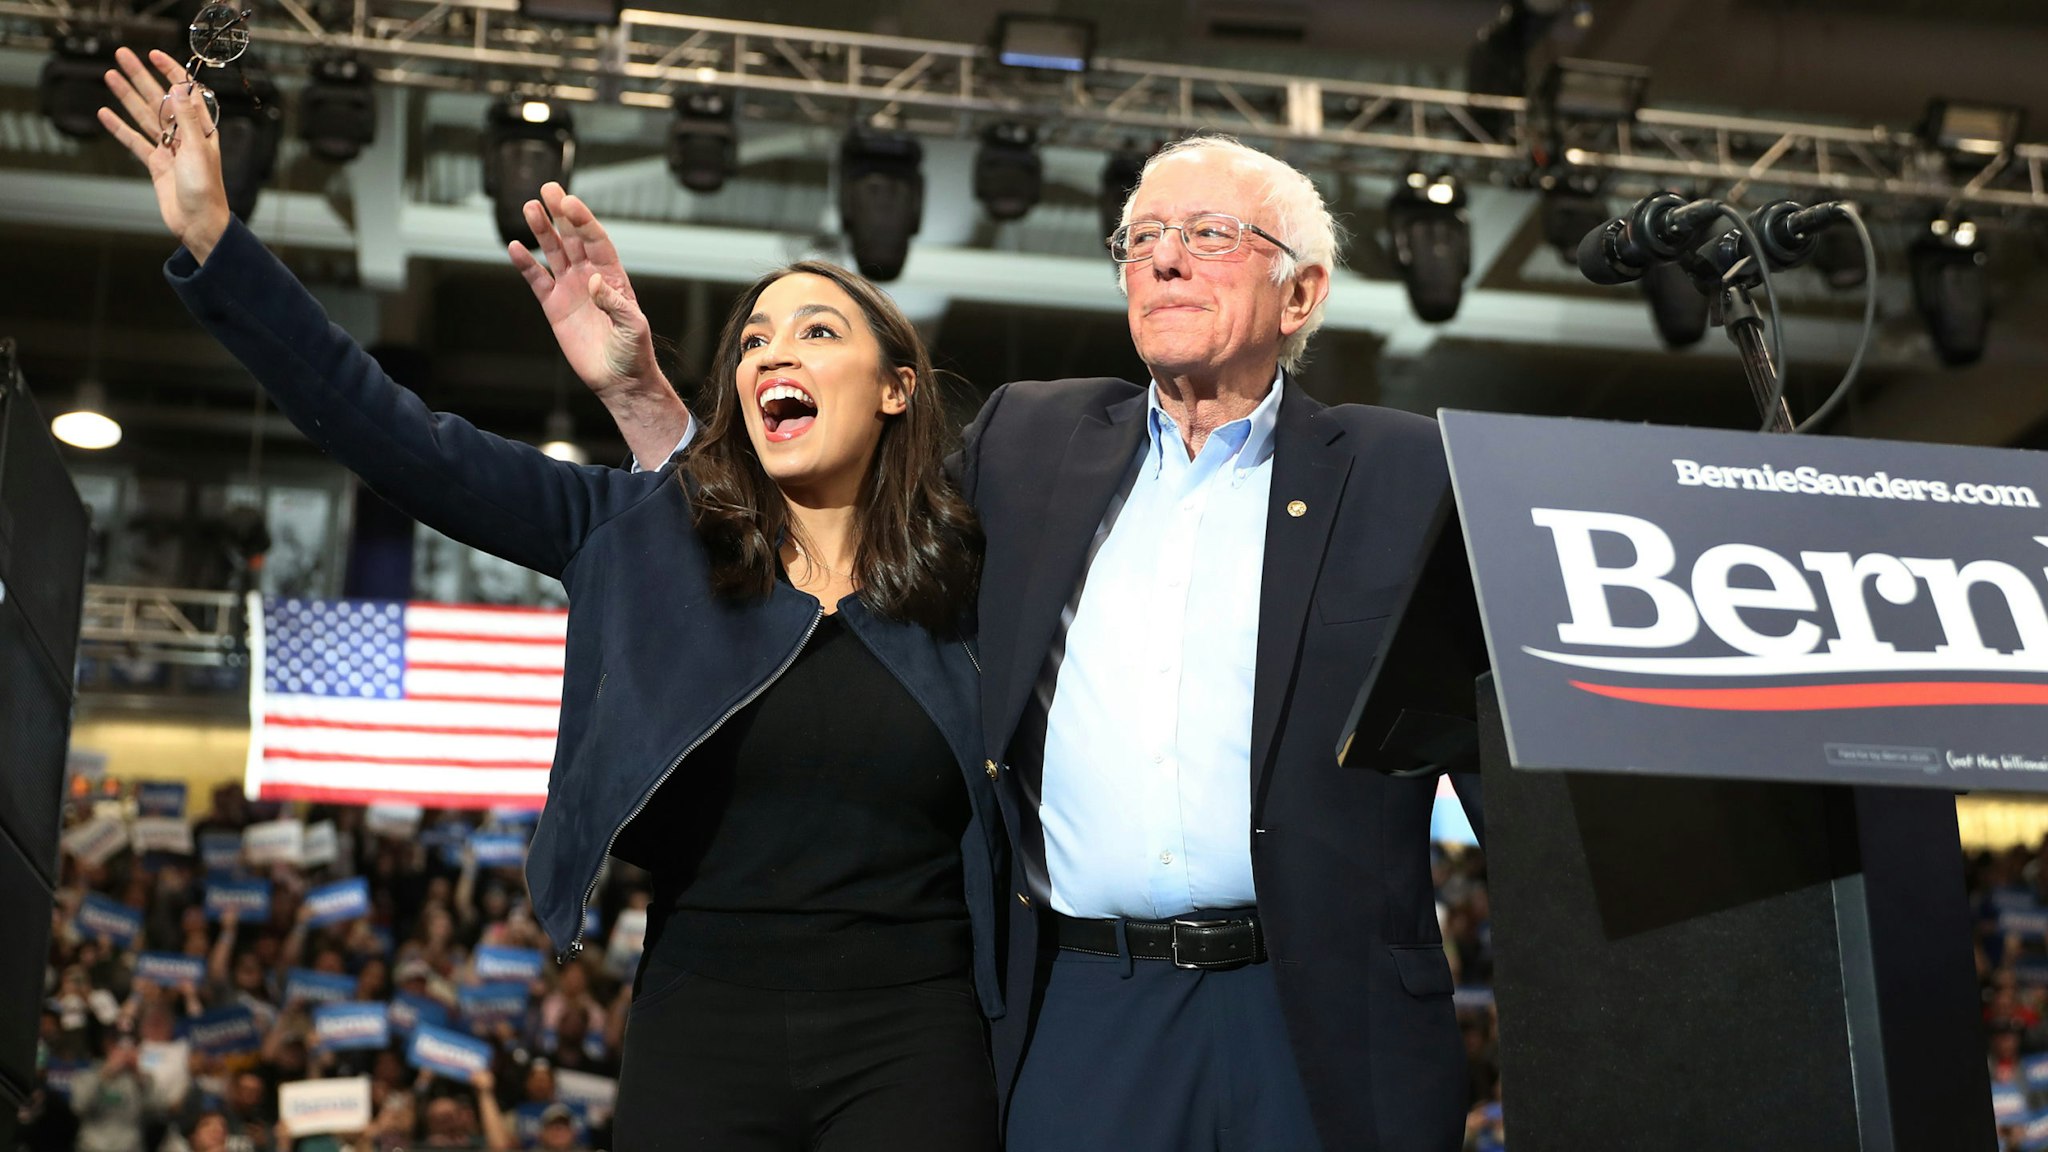 DURHAM, NEW HAMPSHIRE - FEBRUARY 10: U.S. Rep. Alexandria Ocasio-Cortez (D-N.Y) and Democratic presidential candidate Sen. Bernie Sanders (I-VT) stand together during his campaign event at the Whittemore Center Arena on February 10, 2020 in Durham, New Hampshire. The state's Democratic primary is tomorrow. (Photo by Joe Raedle/Getty Images)